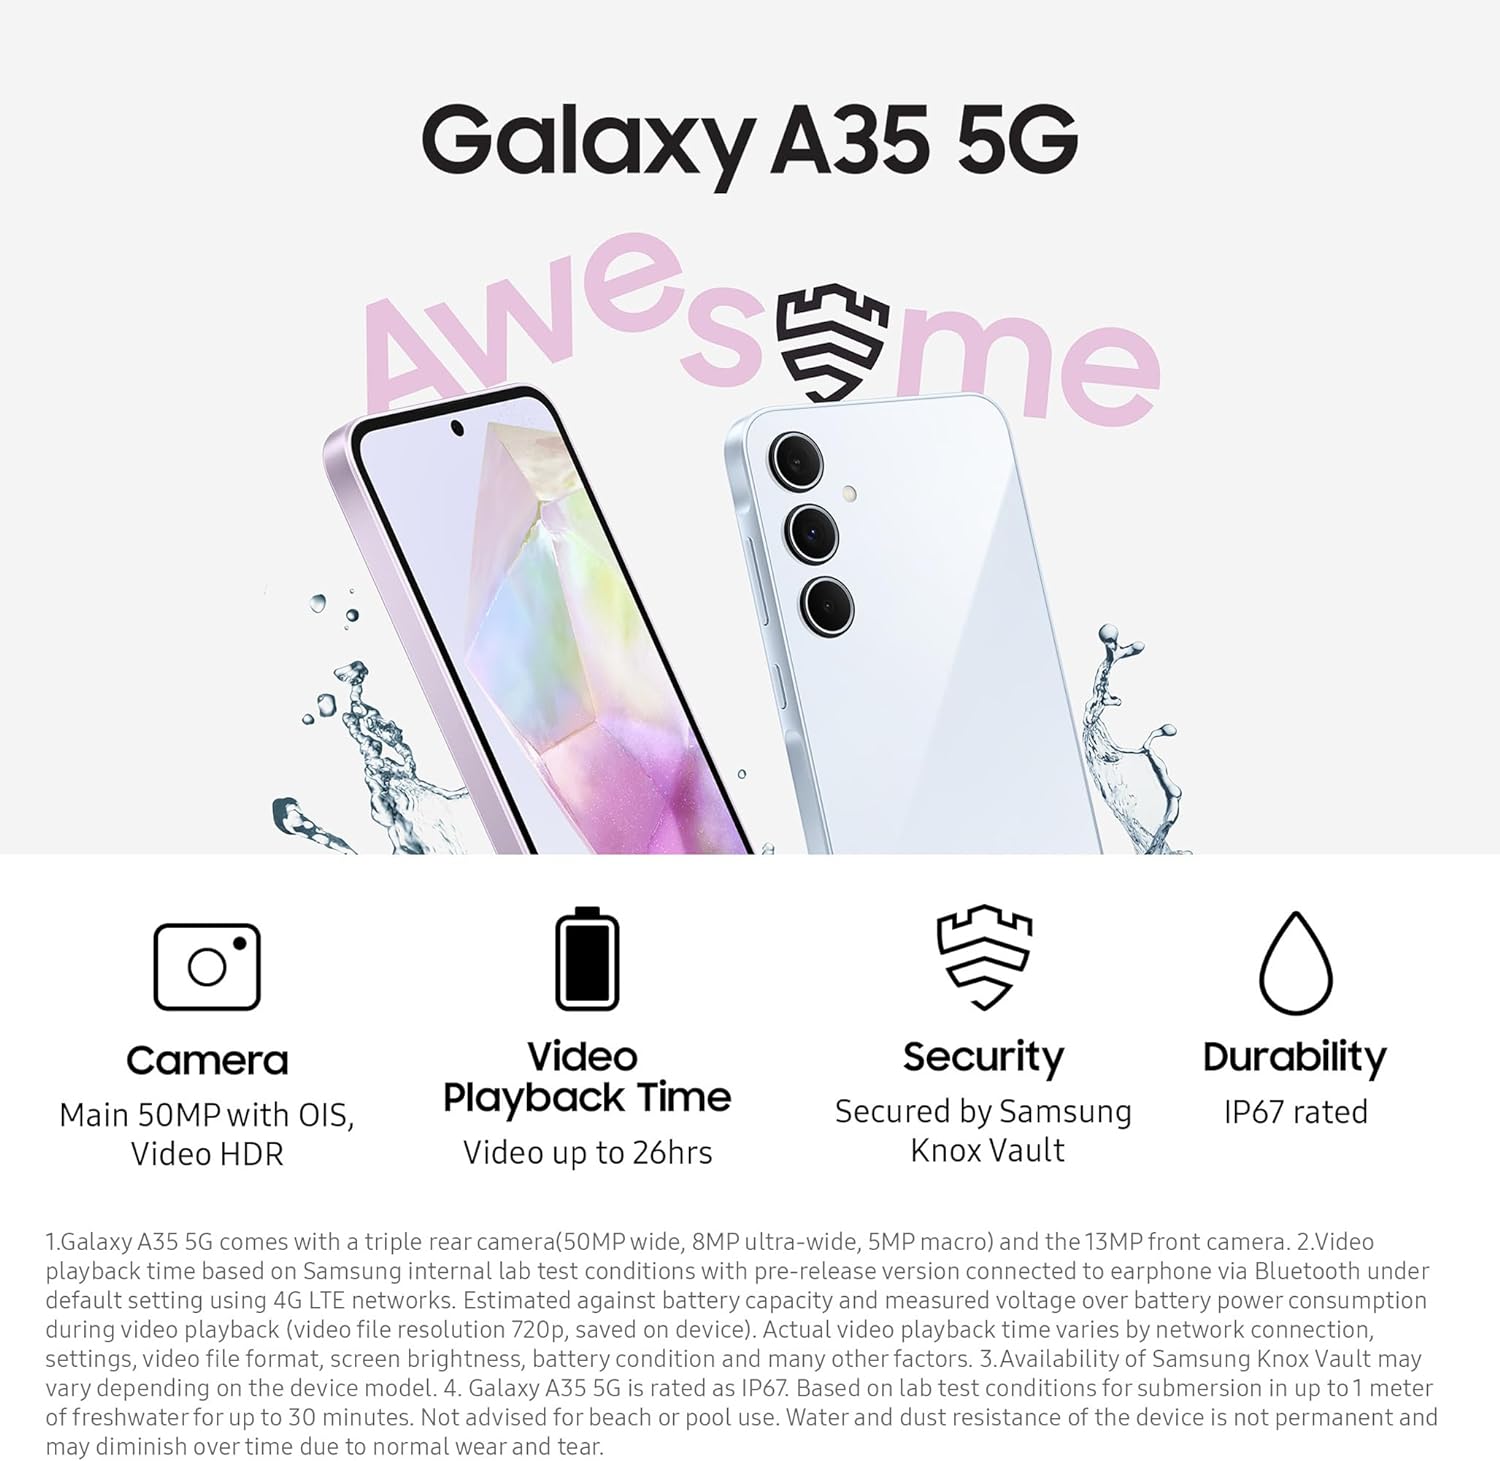 This is a promotional image for the Samsung Galaxy A35 5G smartphone. The image highlights the phone's key features, such as:
- A main camera system with a 50MP sensor with OIS (Optical Image Stabilization) and Video HDR.
- Video playback time of up to 26 hours.
- Security features provided by Samsung Knox Vault.
- Durability with an IP67 rating, indicating resistance to water and dust.
The picture shows the front and back of the smartphone. The phone is depicted with water splashes around to illustrate its water resistance property. There is additional explanatory text at the bottom providing disclaimers and further details about the specifications and conditions for the IP67 rating.